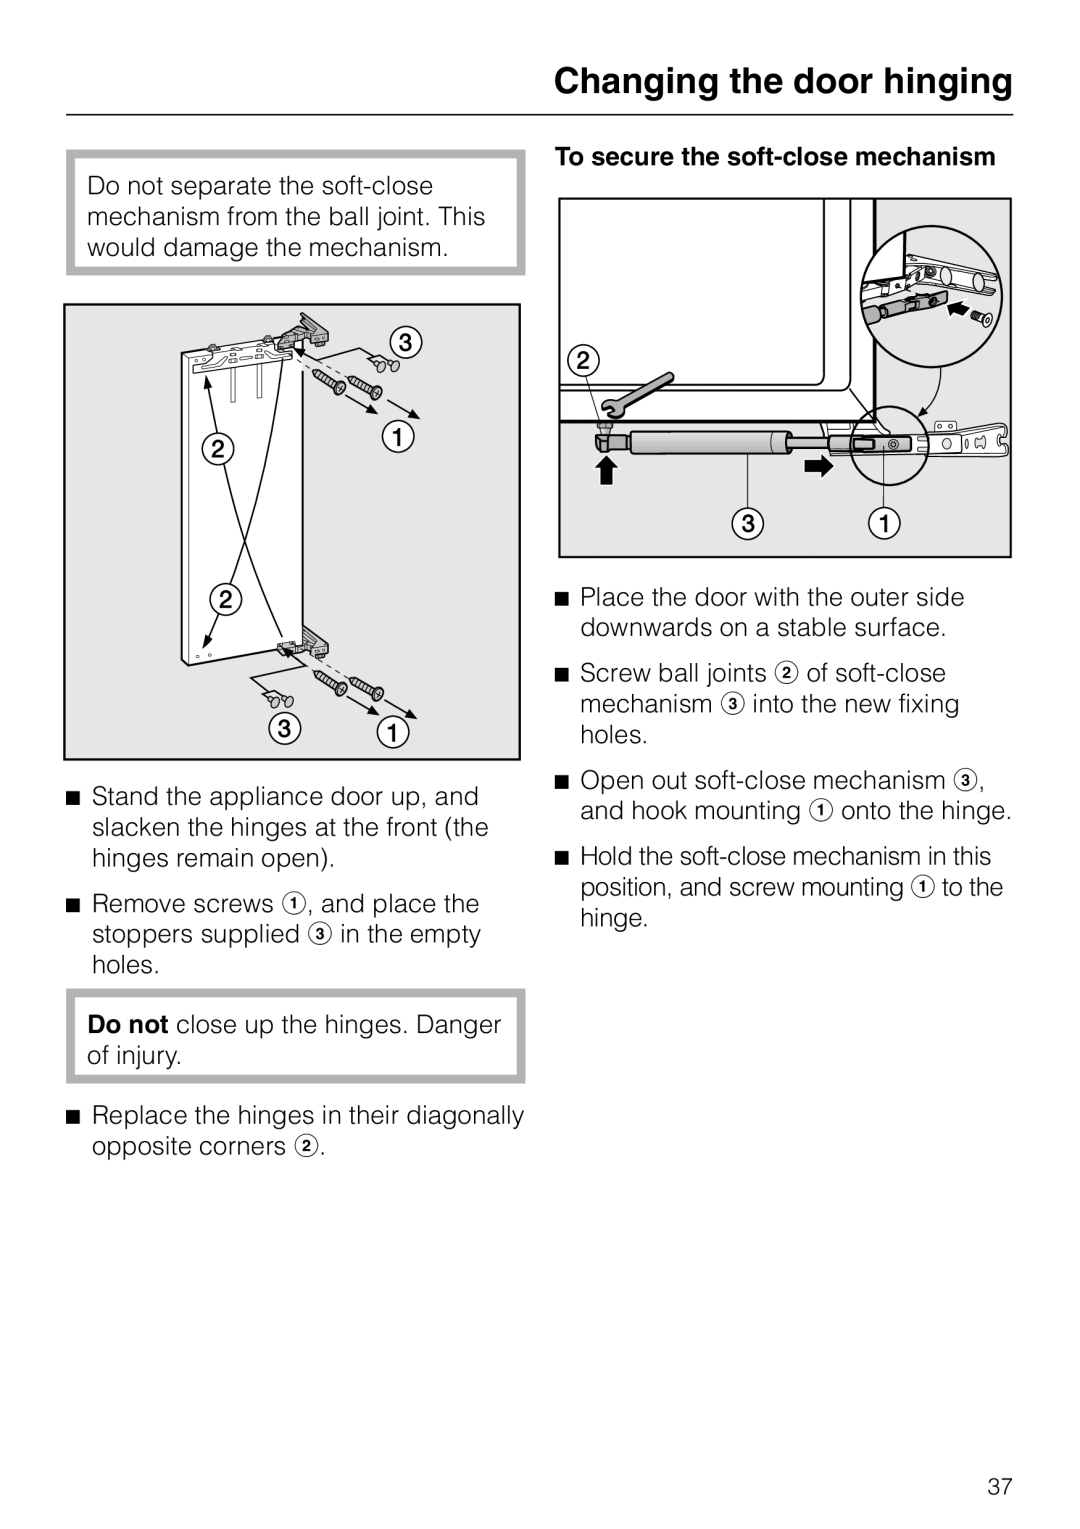 Miele F 456 i-3 installation instructions To secure the soft-closemechanism, Changing the door hinging 